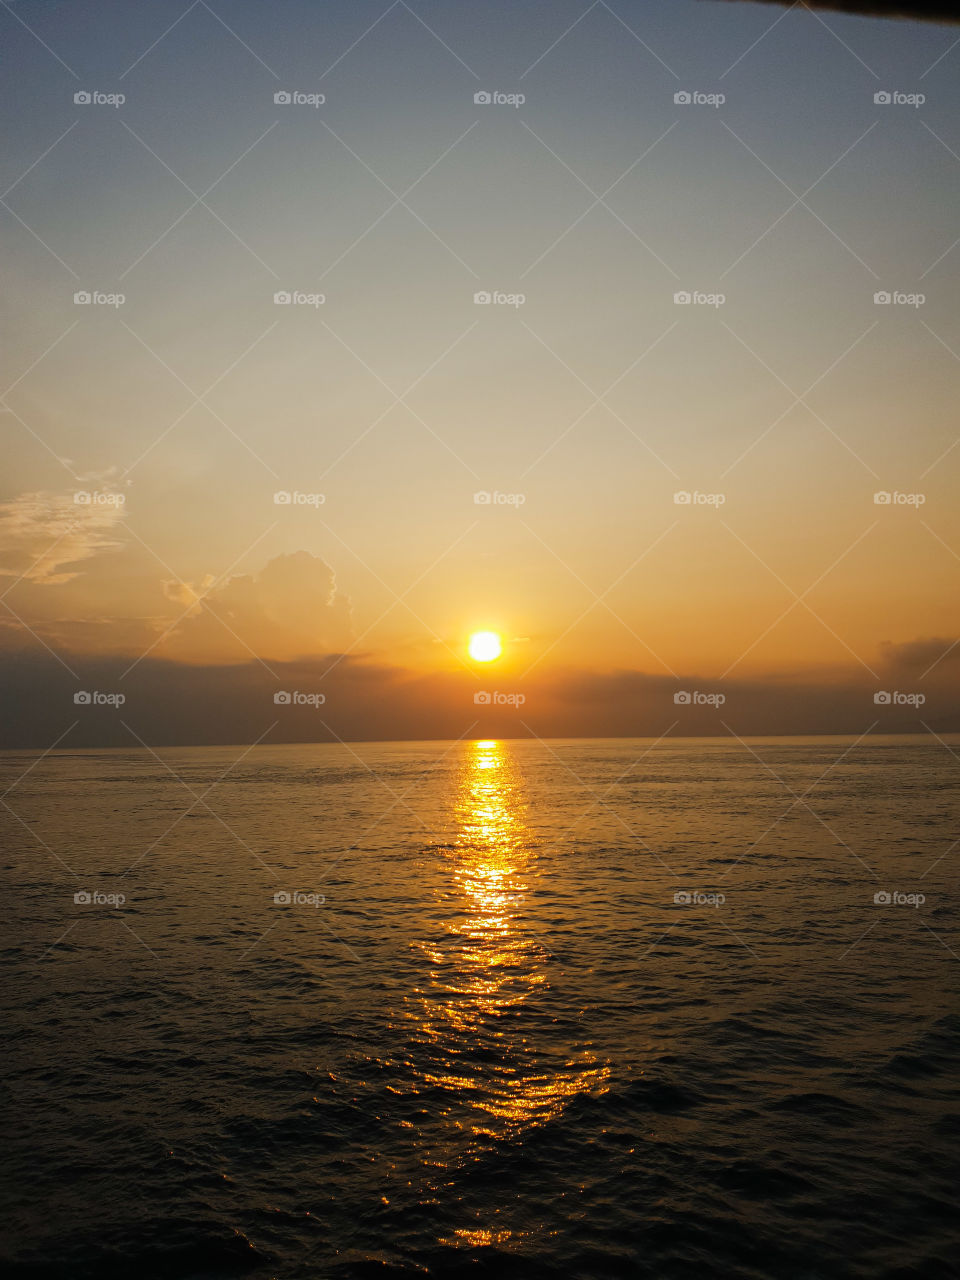 Sunrise is seen from the ship